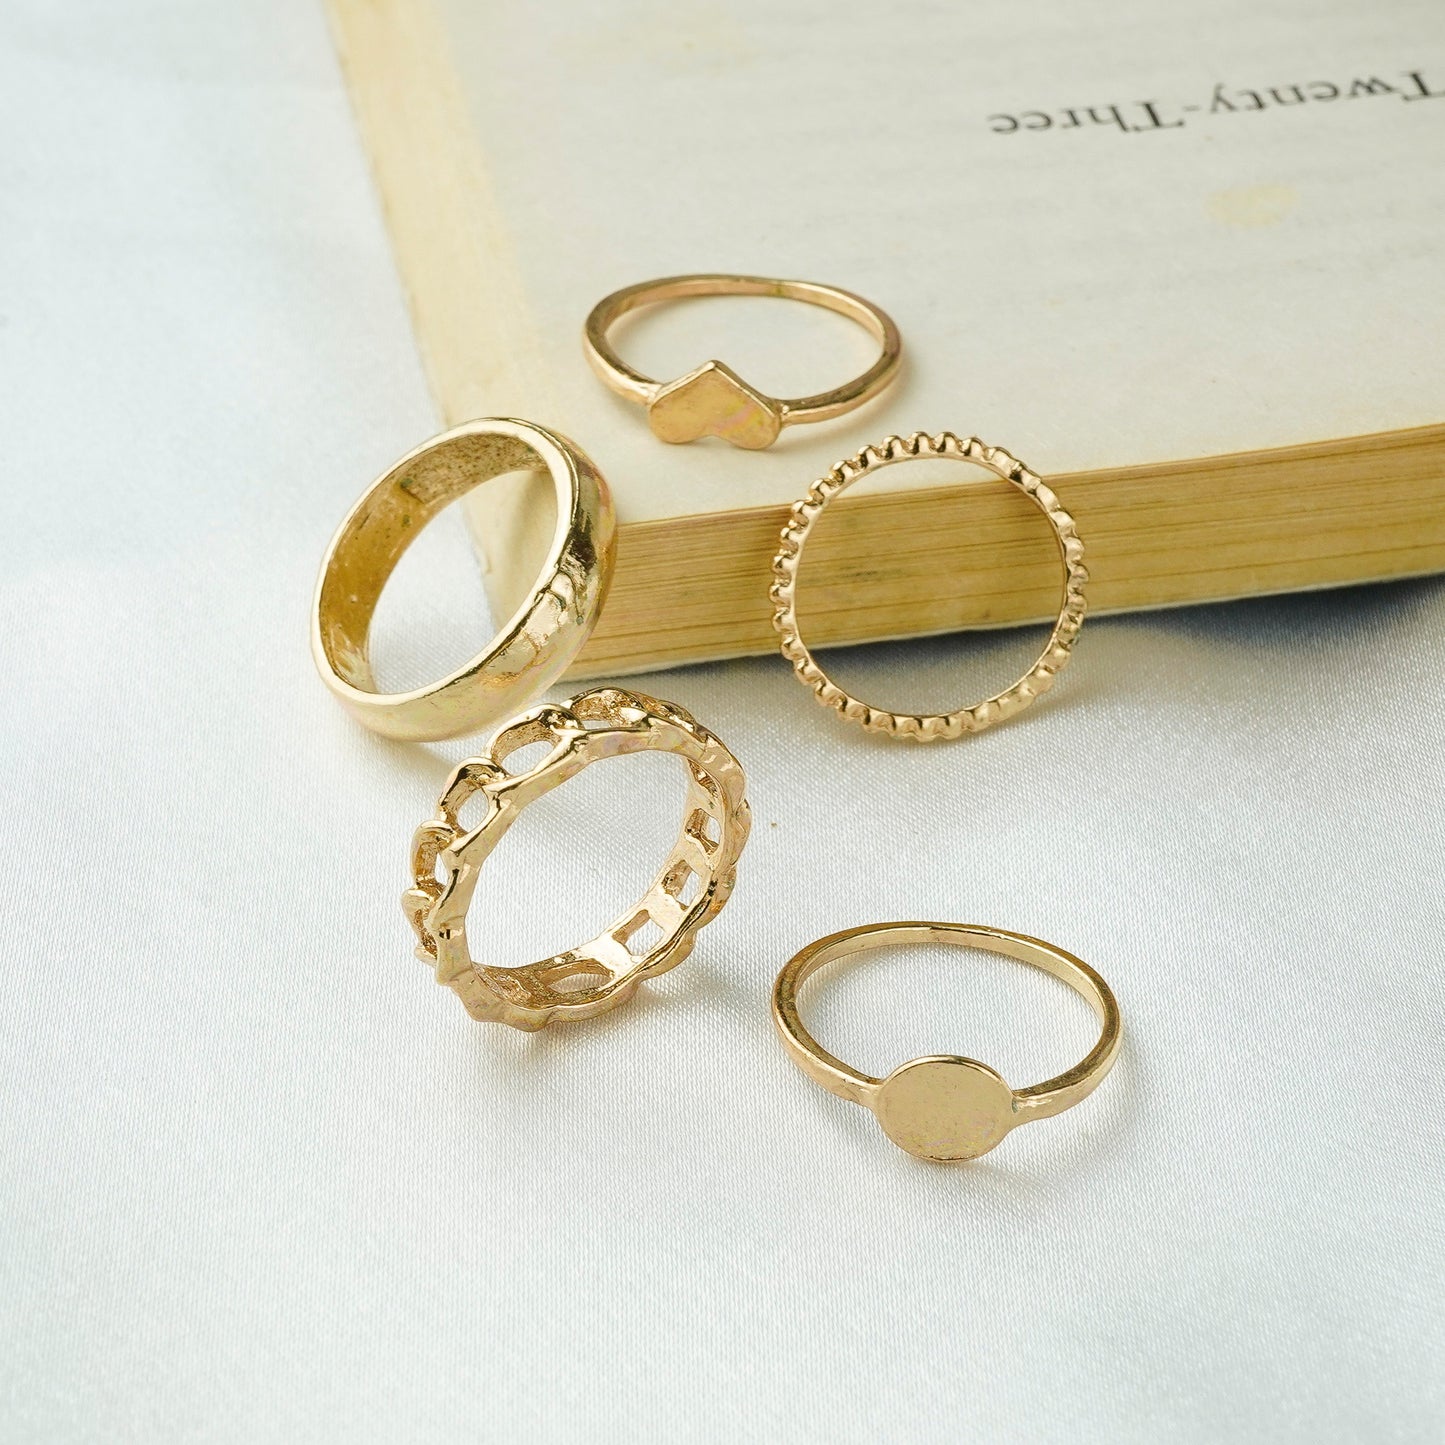 Trendy Set Ring For Fashionable Women(Code:R25)